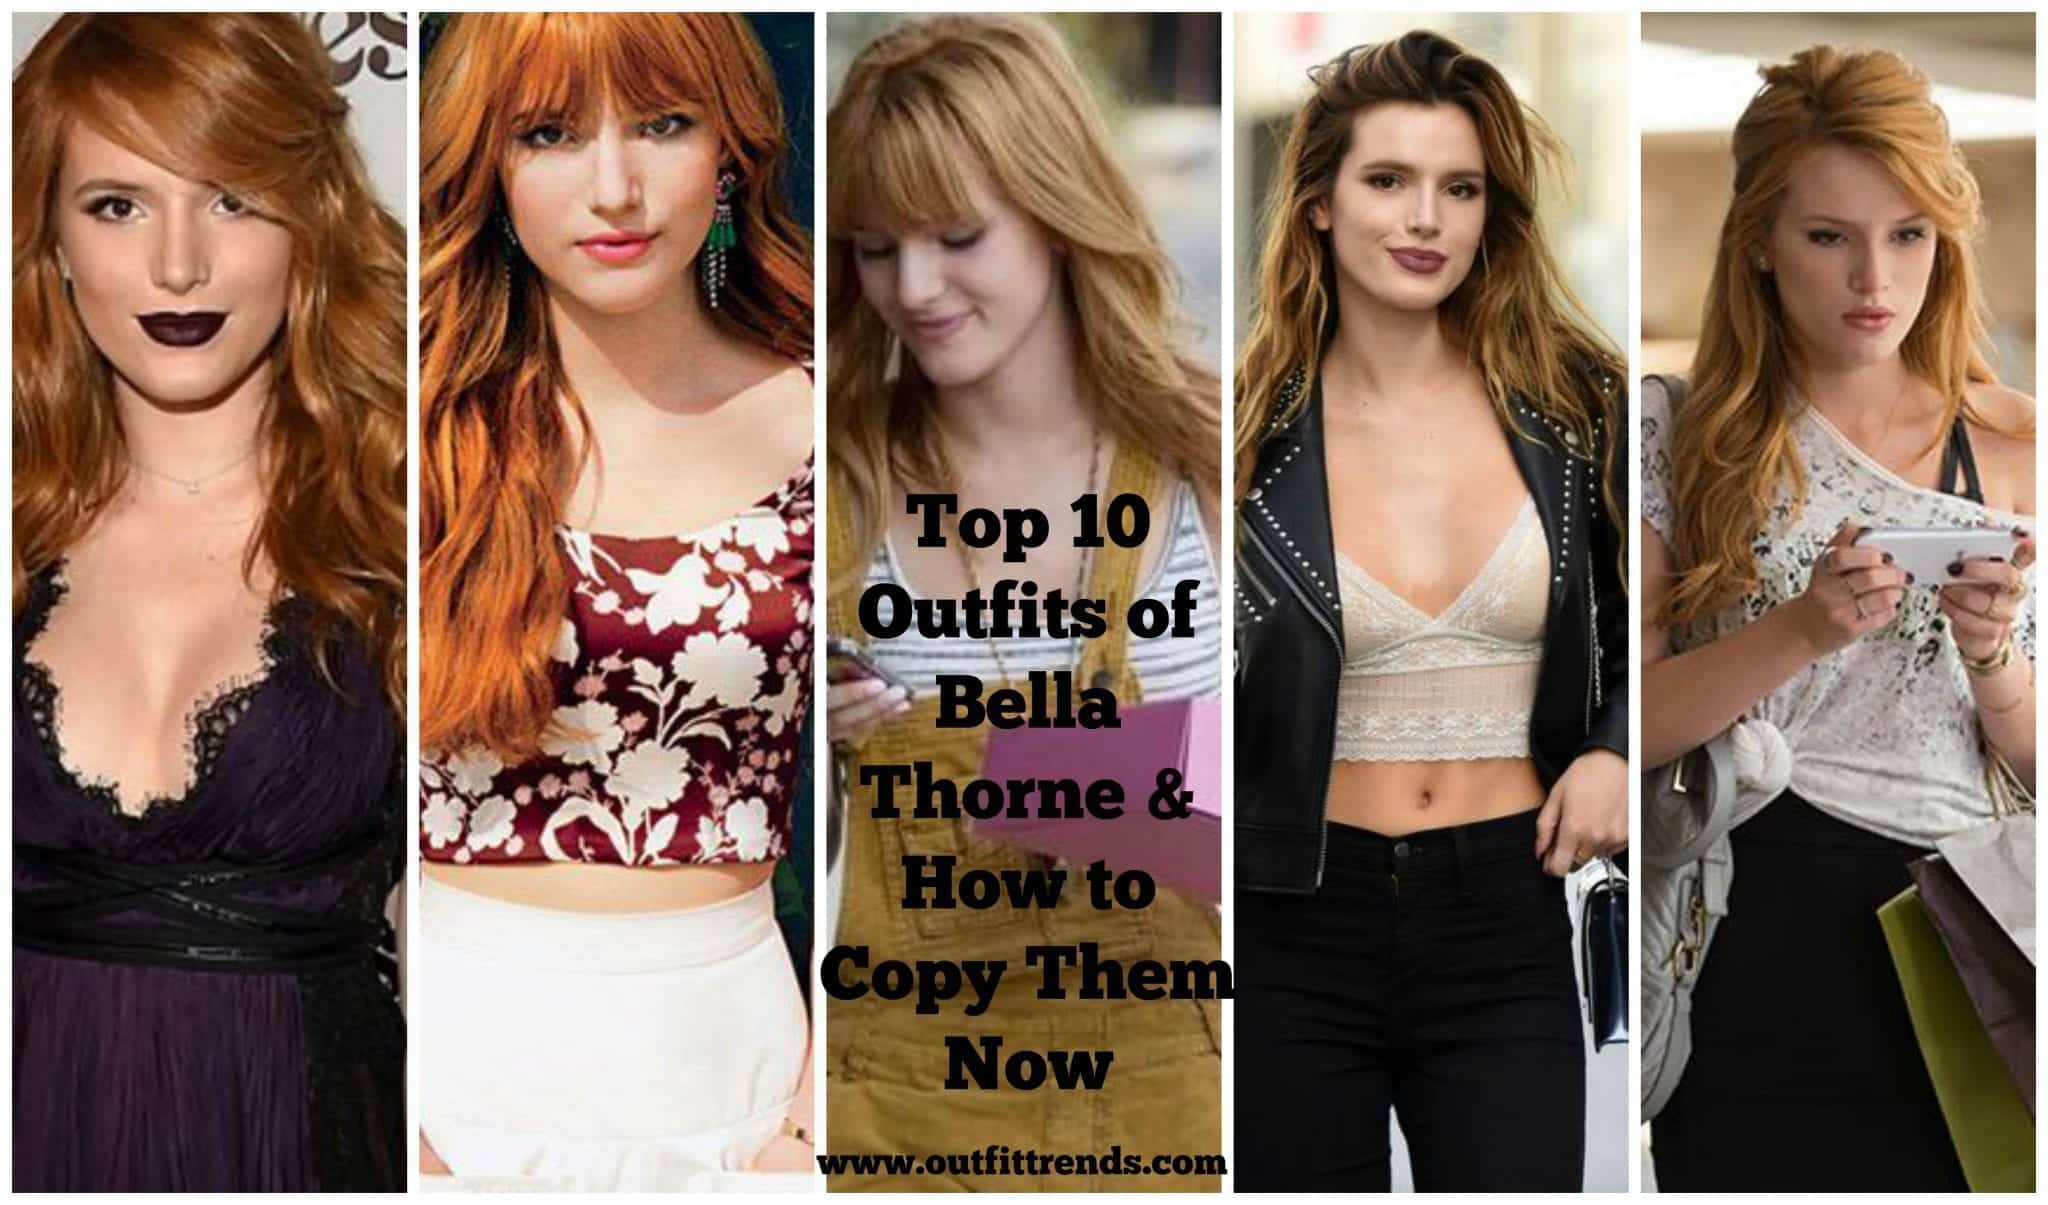 How to Dress Up like Bella Thorne–Copy Top 10 Outfits of Bella